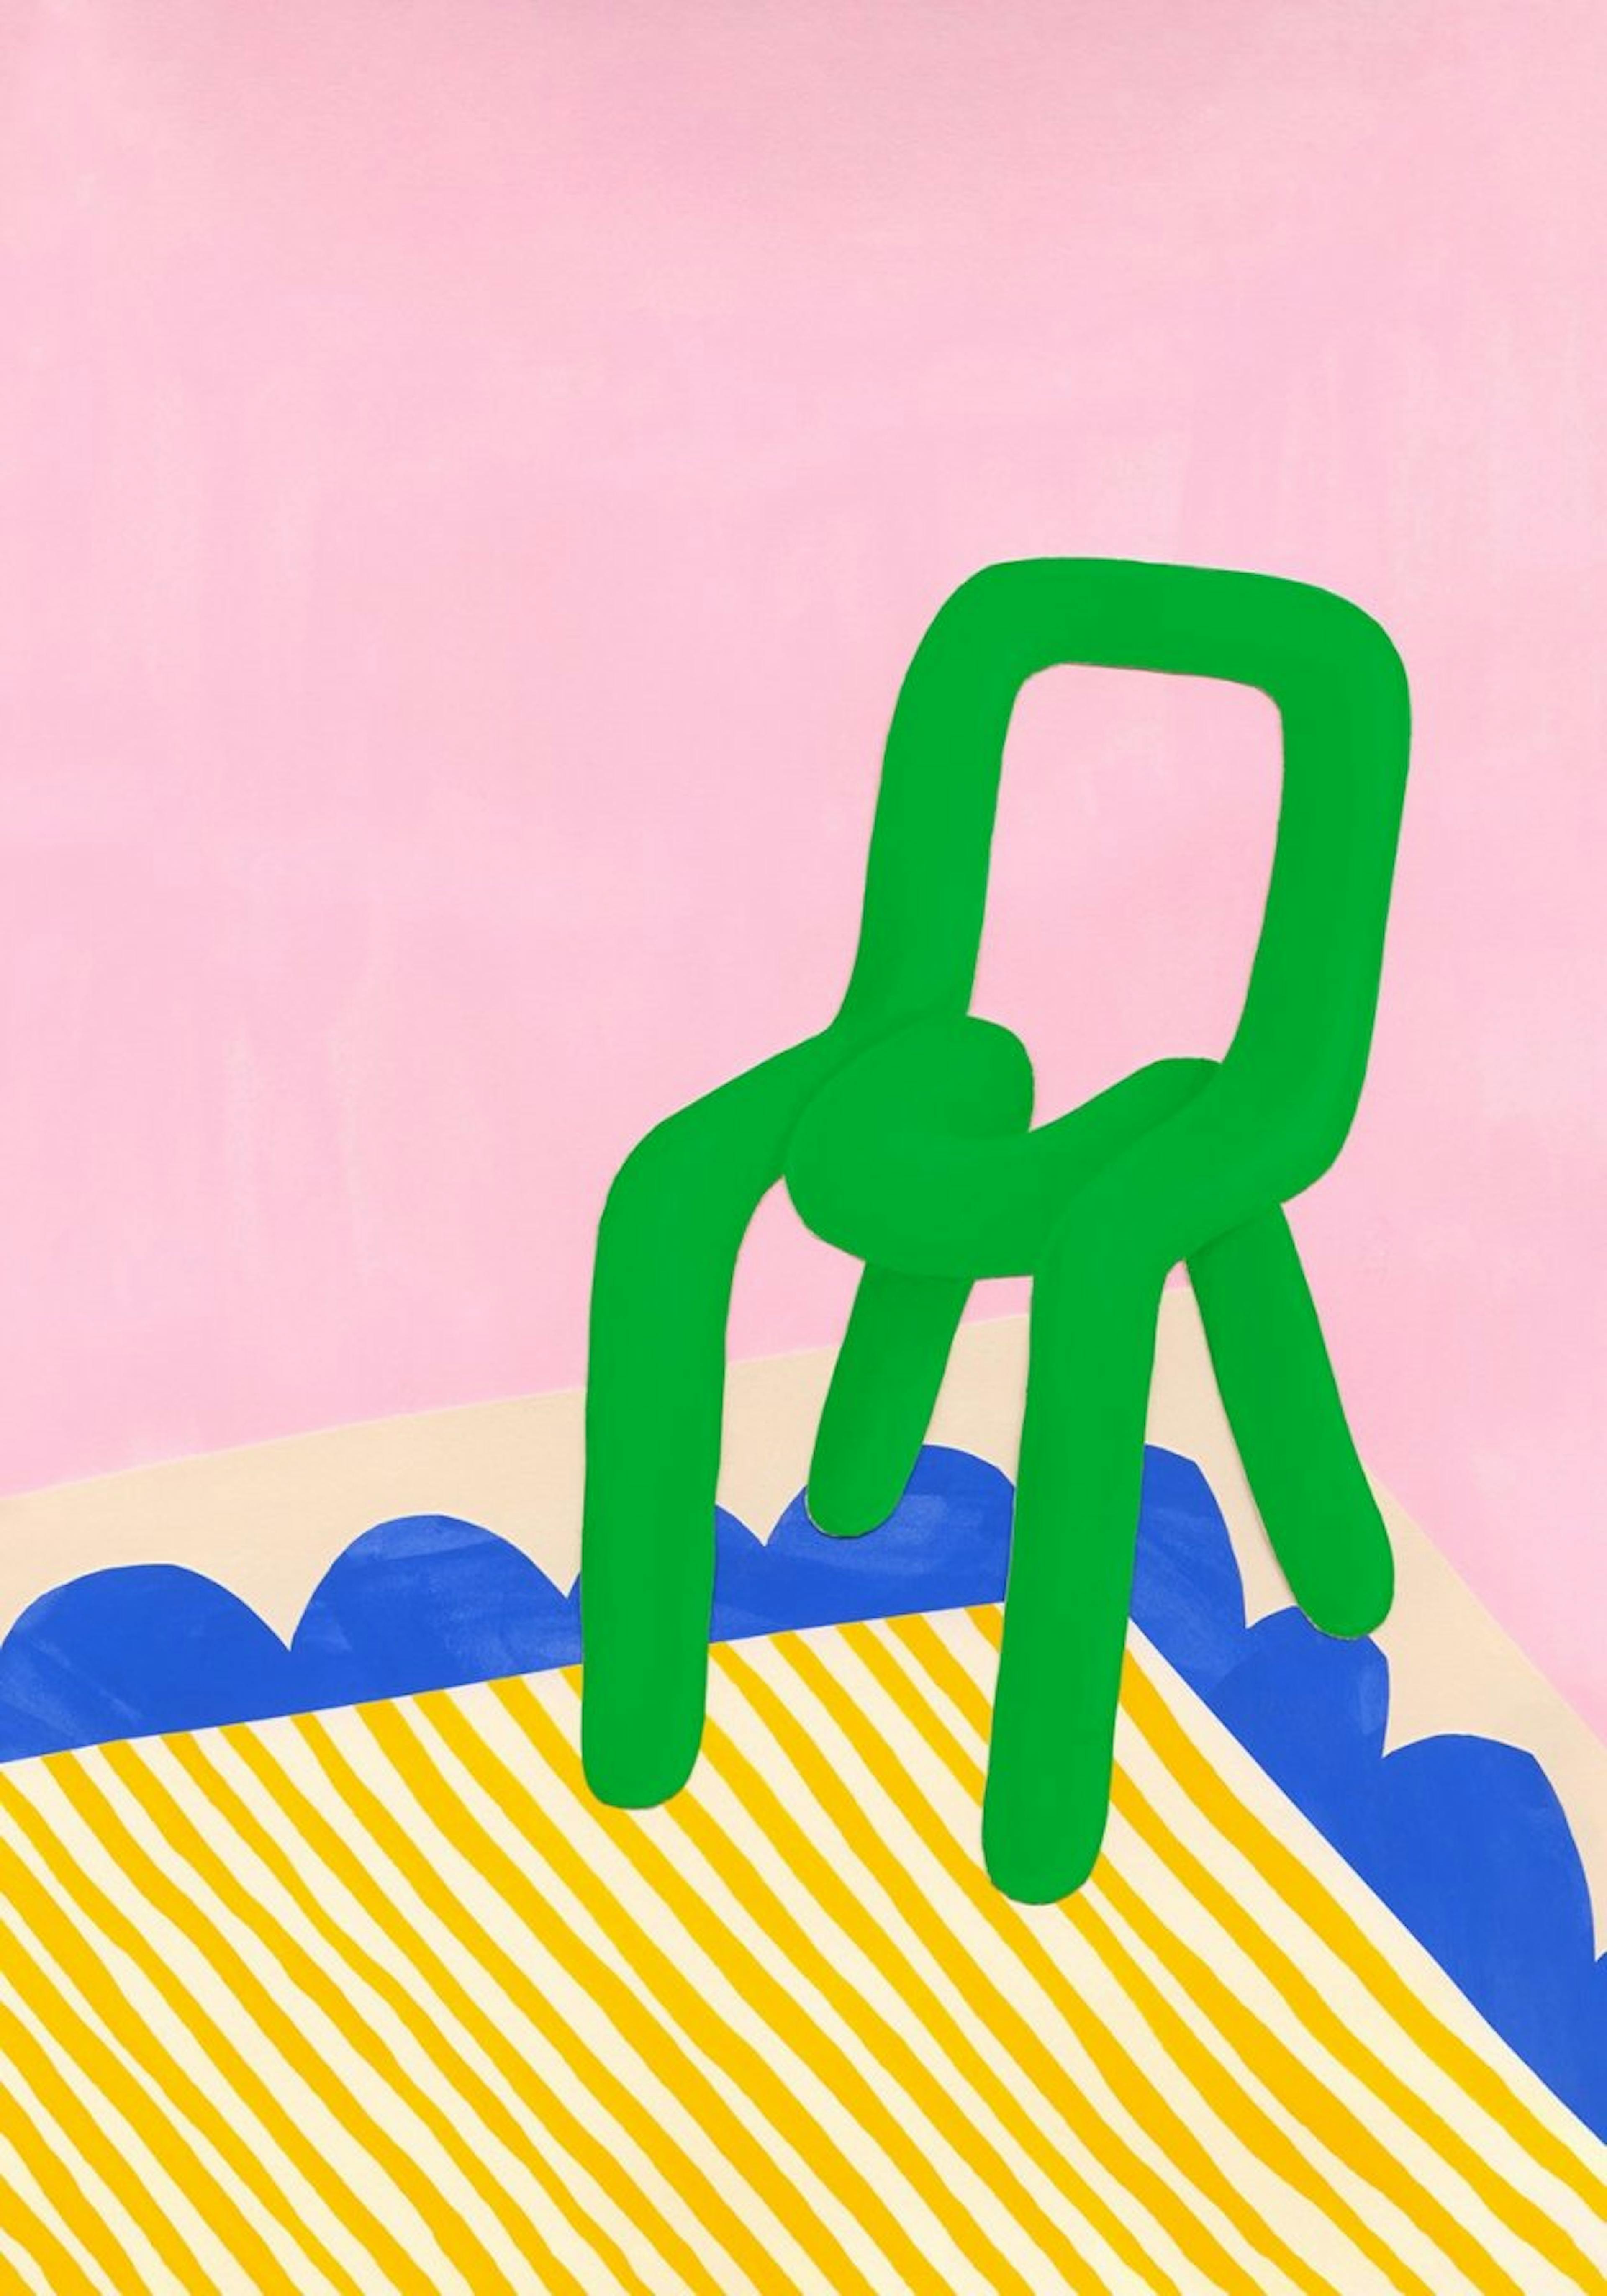 Bold Chair Poster 0